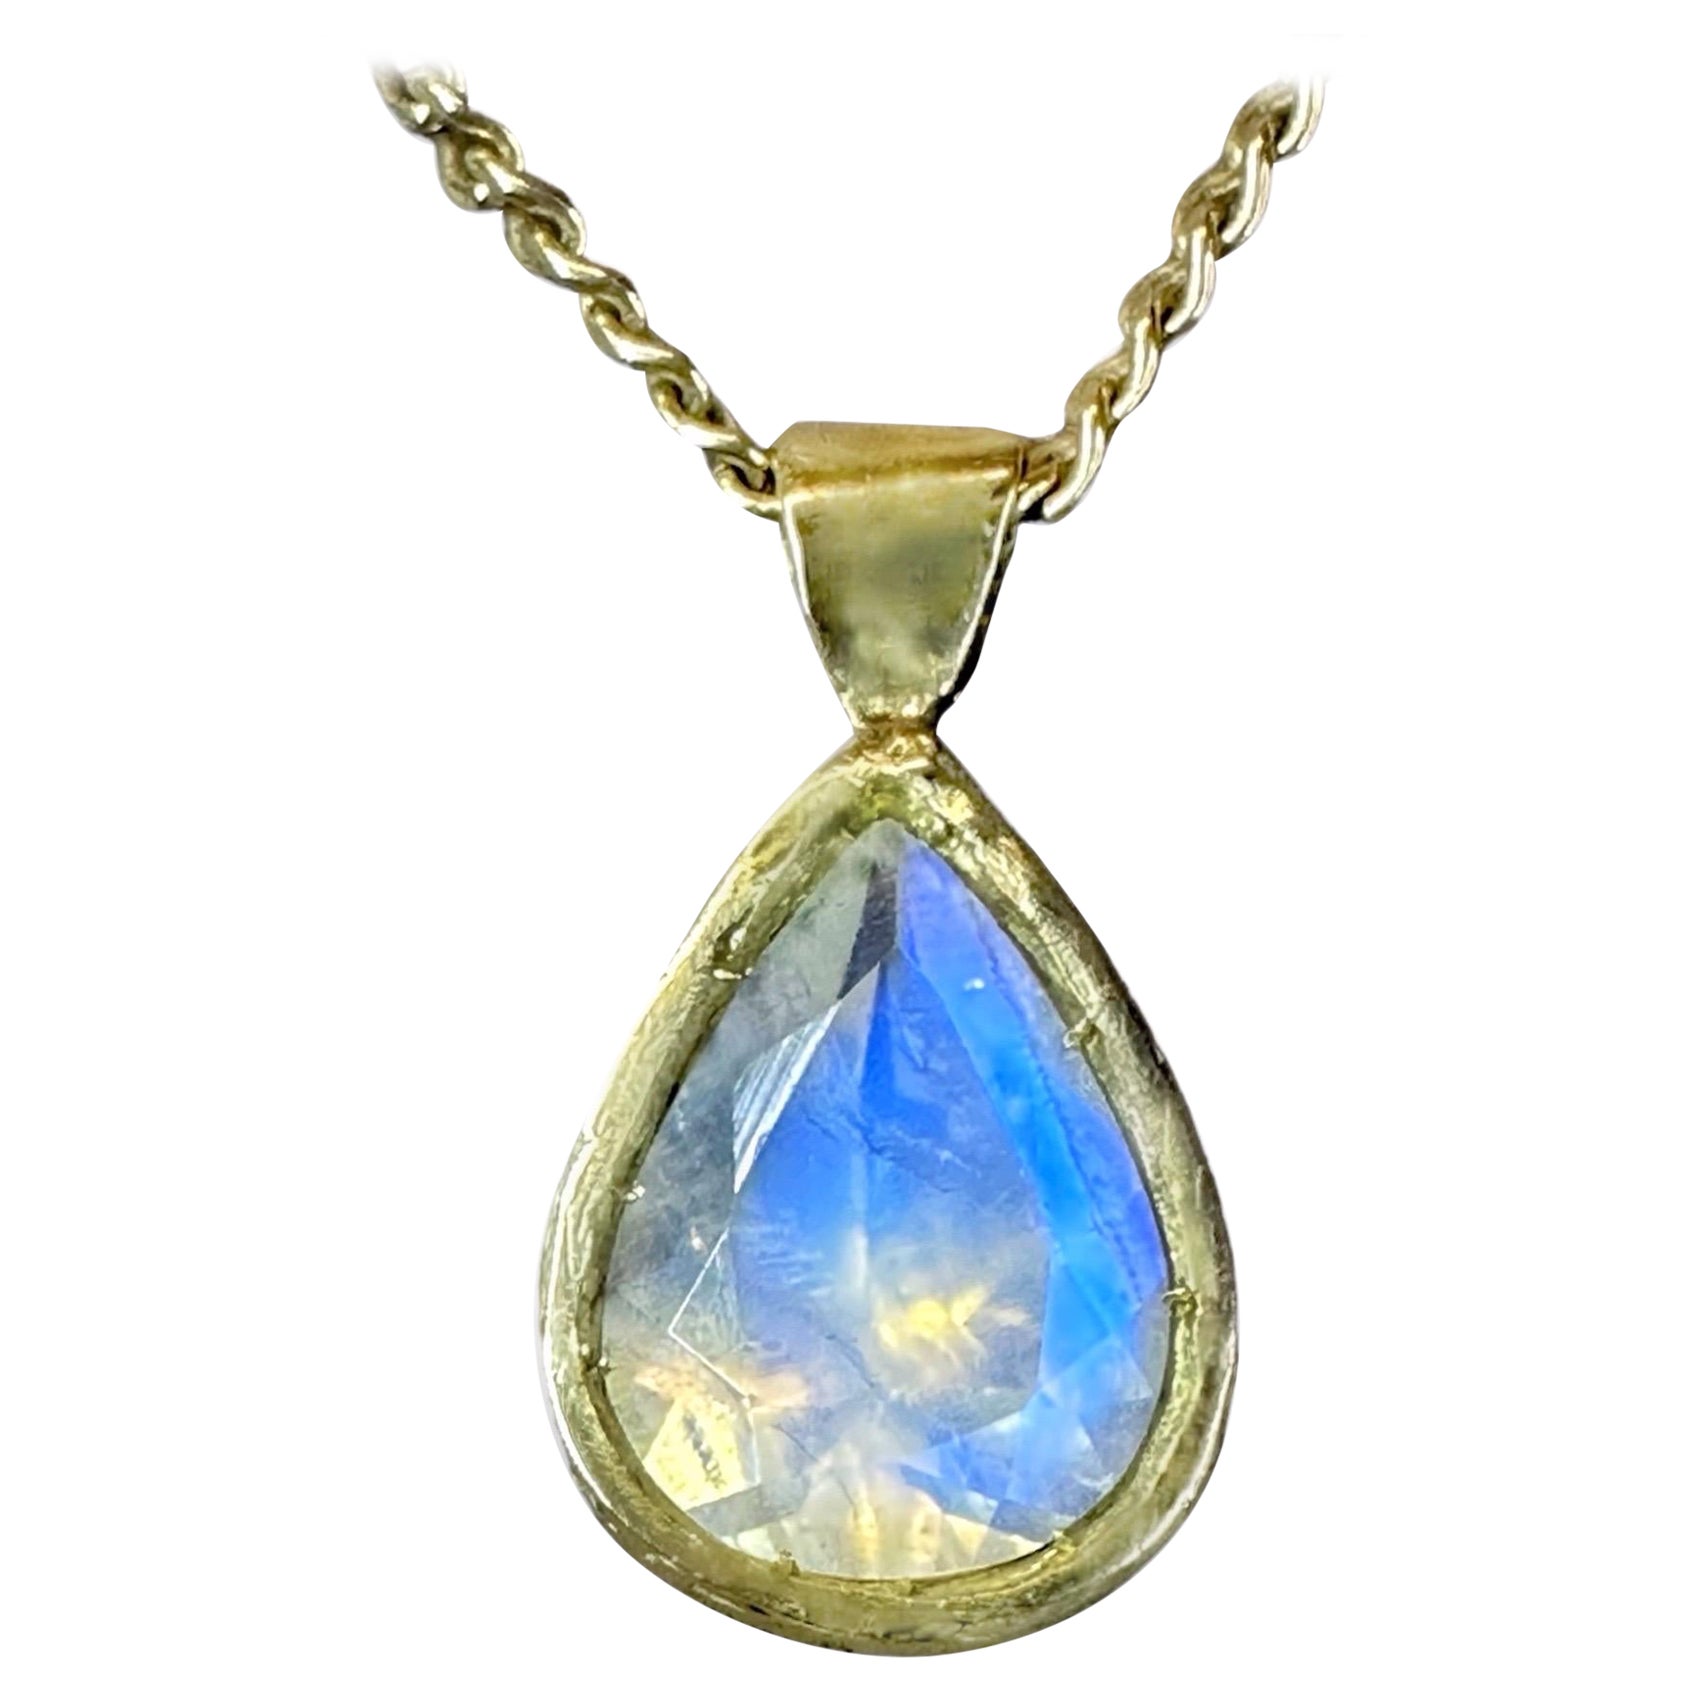 Drop Large Pendant Rainbow Moonstone Gold Necklace One of a Kind in stock